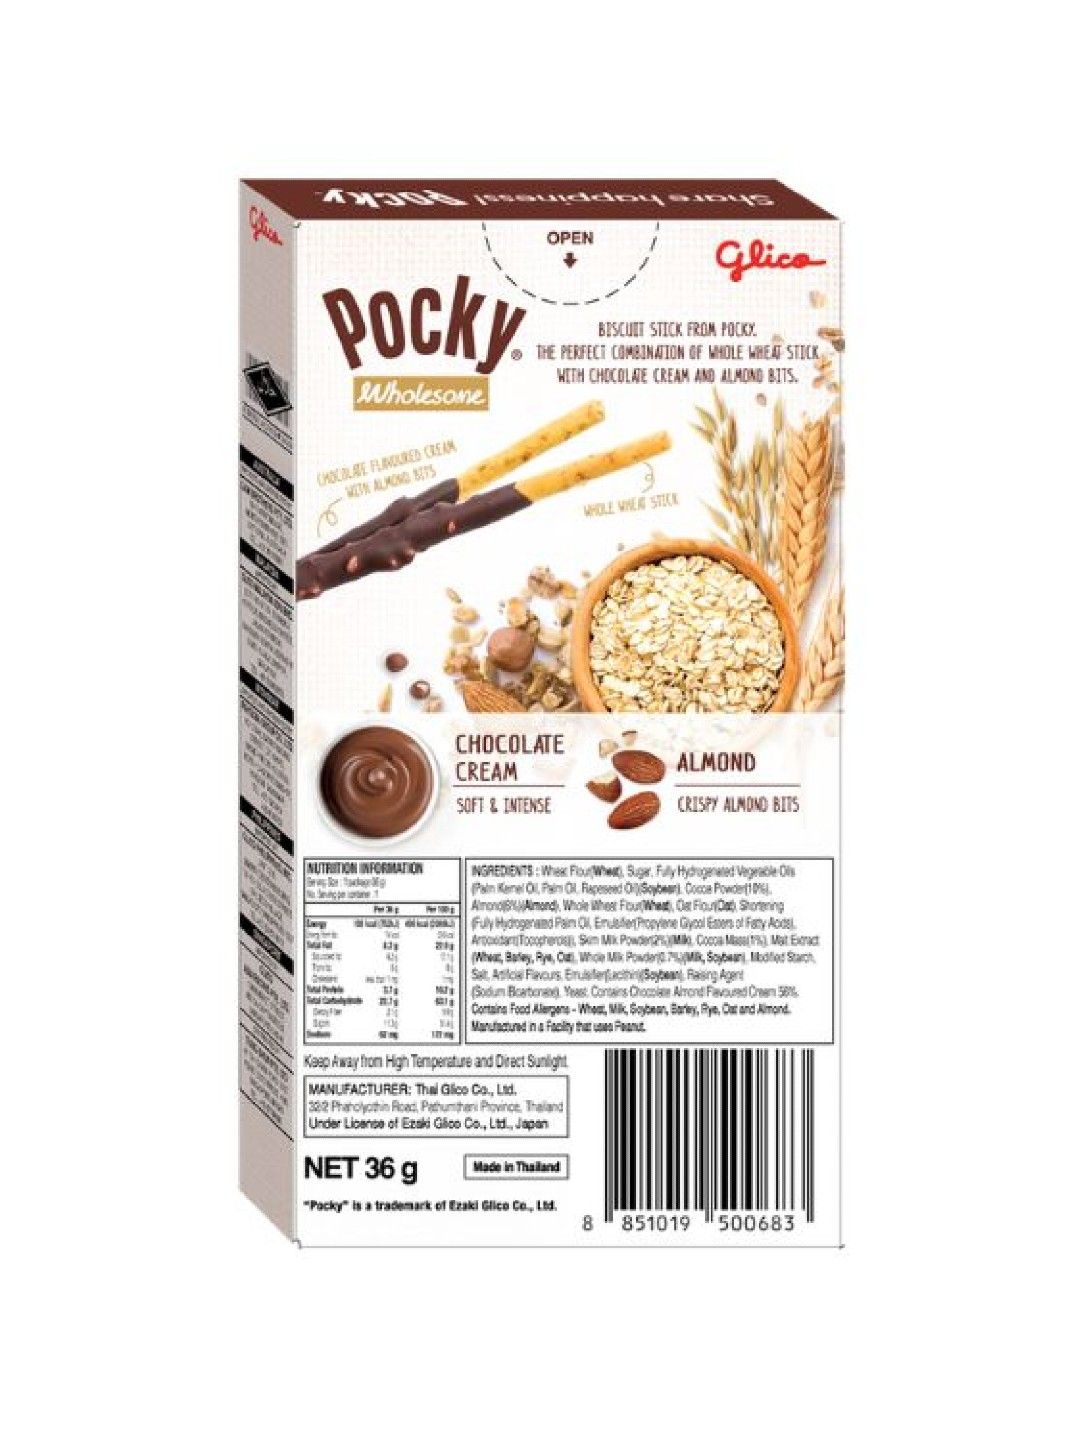 Pocky Wholesome Chocolate Almonds Biscuit Sticks (No Color- Image 2)